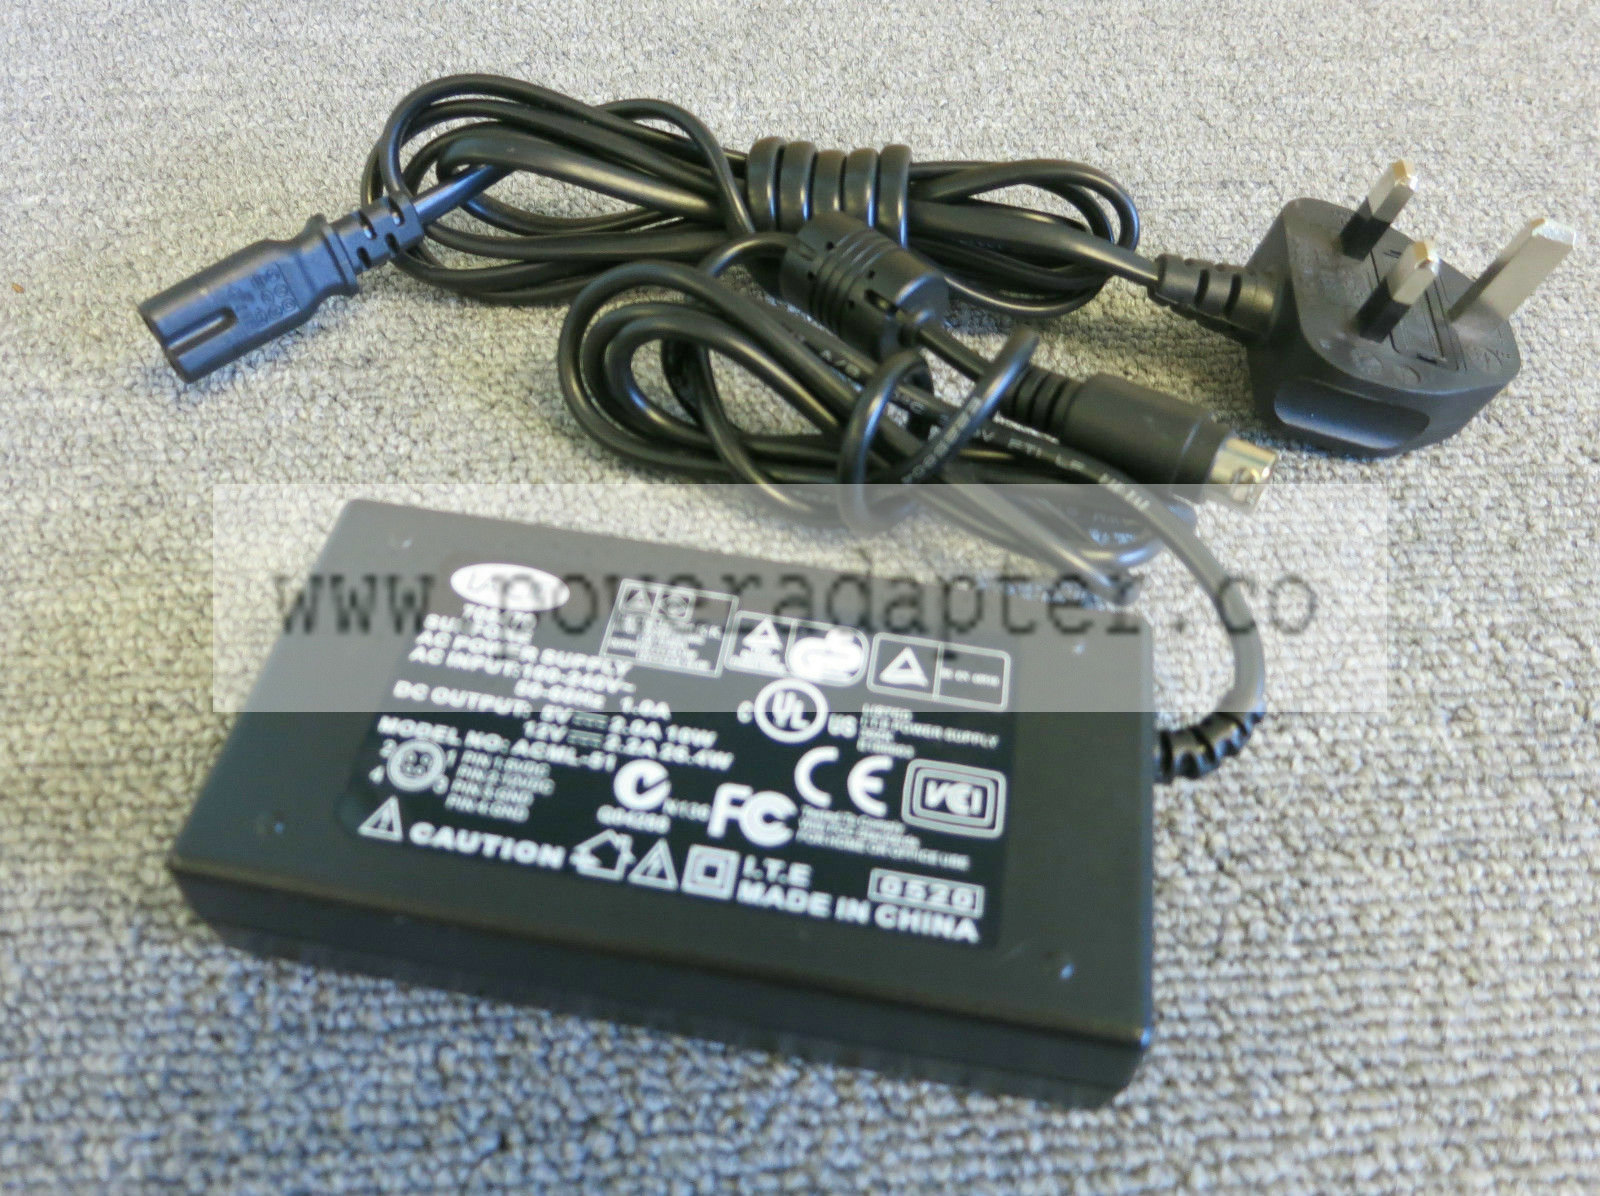 Lacie 706479, ACML-51 AC Power Adapter 4 Pin DIM 5V 2.0A 10W / 12V 2.2A 26.4W Supplied: With mains power cable Brand